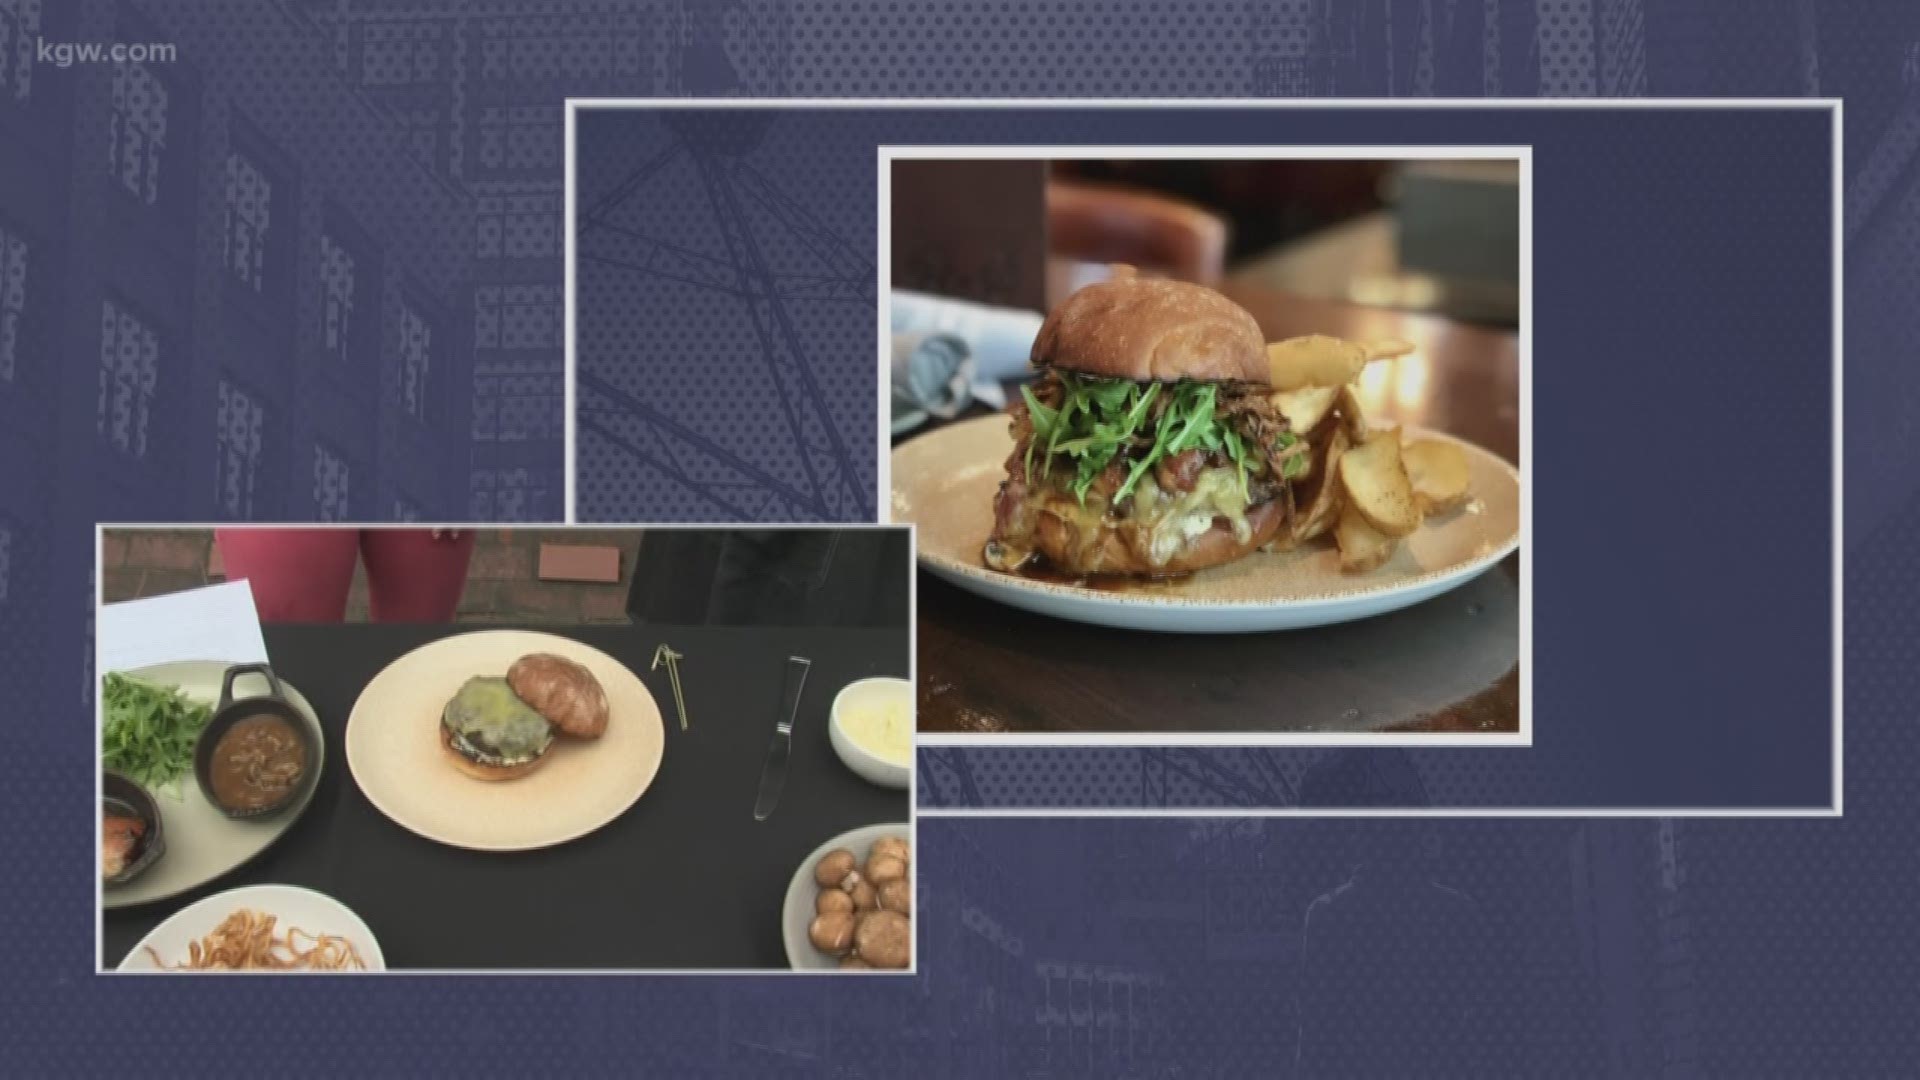 Five Portland restaurants are serving up 'Blended Burgers' for the James Beard Blended Burger Project. Try a burger and then cast your vote.
jamesbeard.org/blendedburgerproject
#TonightwithCassidy